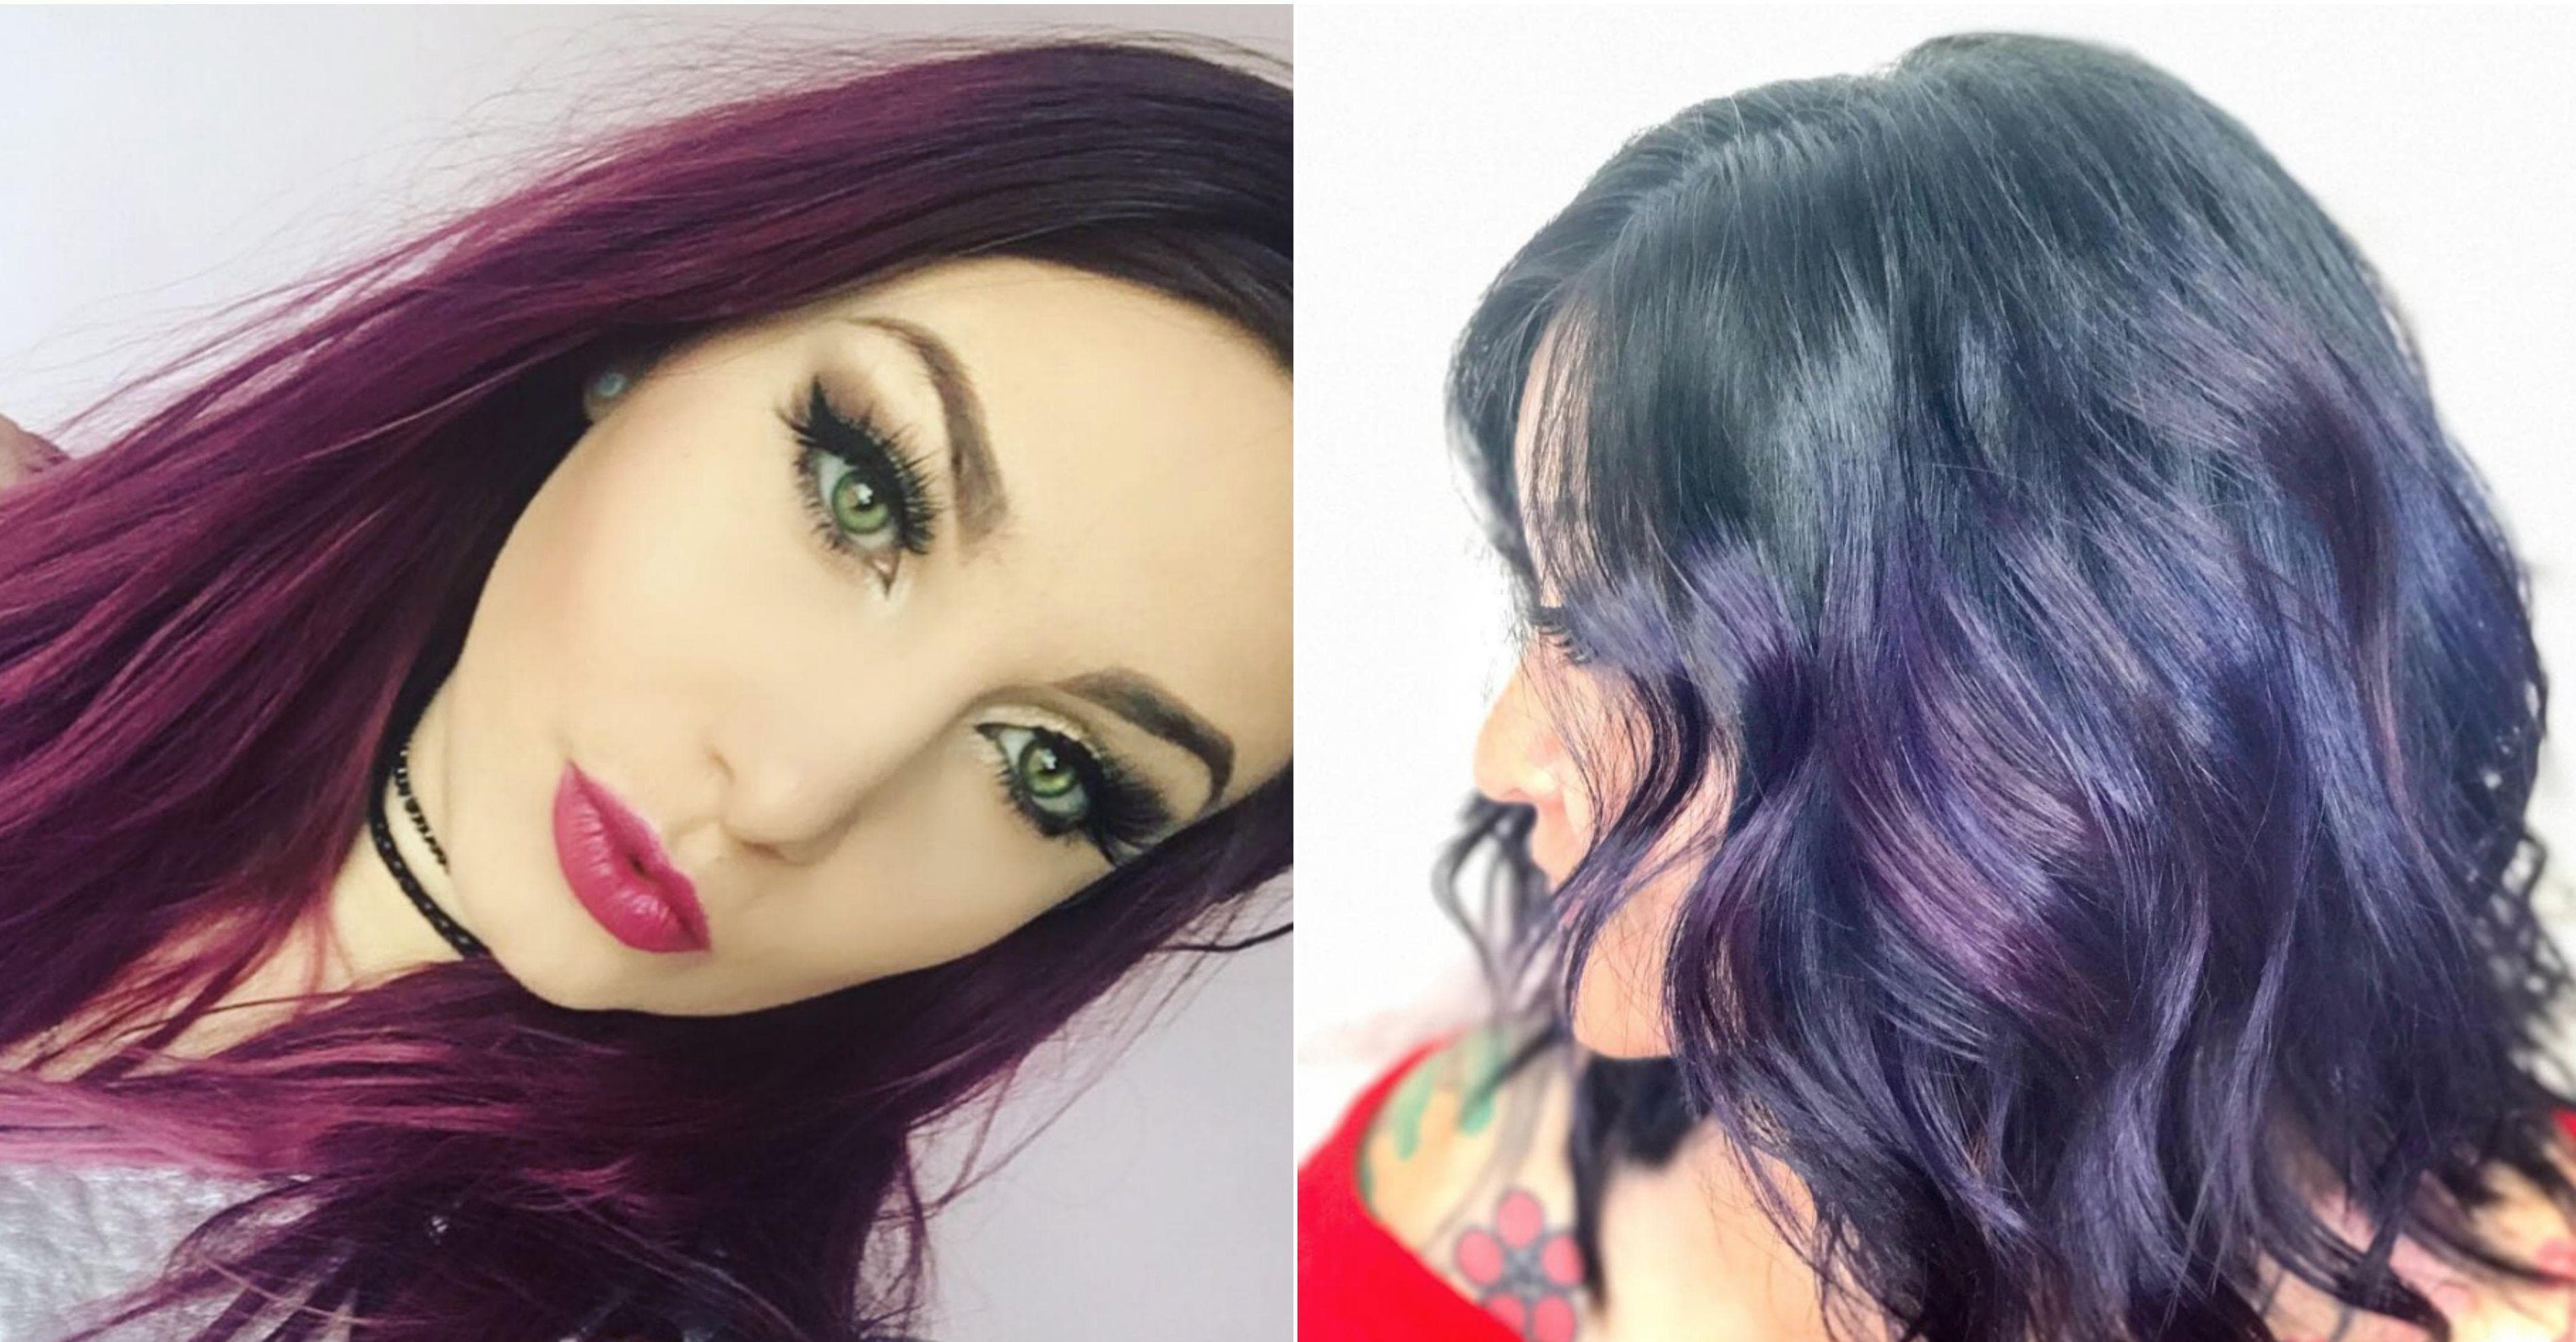 Blackberry Hair Is Your New Low Maintenance Hair Color Inspiration